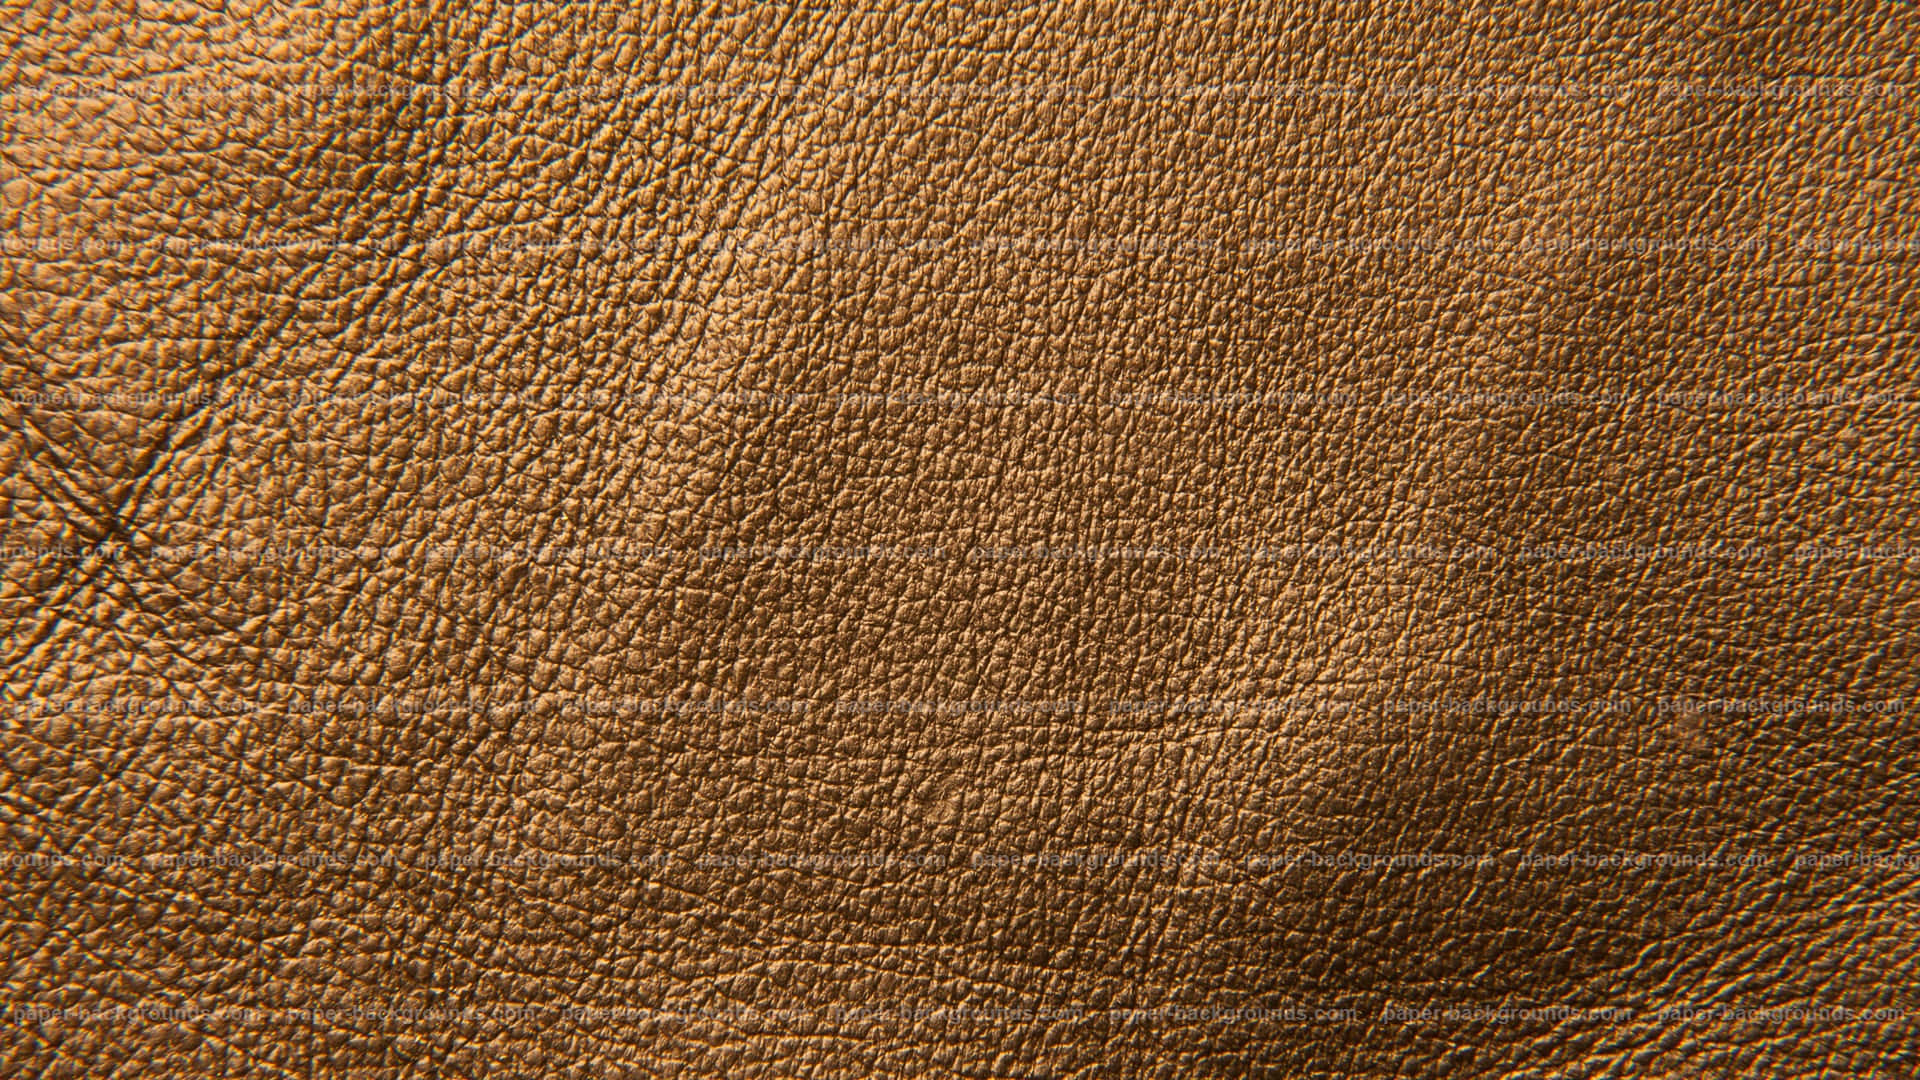 Caption: Elegant Leather Texture with Horizontal Lines Wallpaper